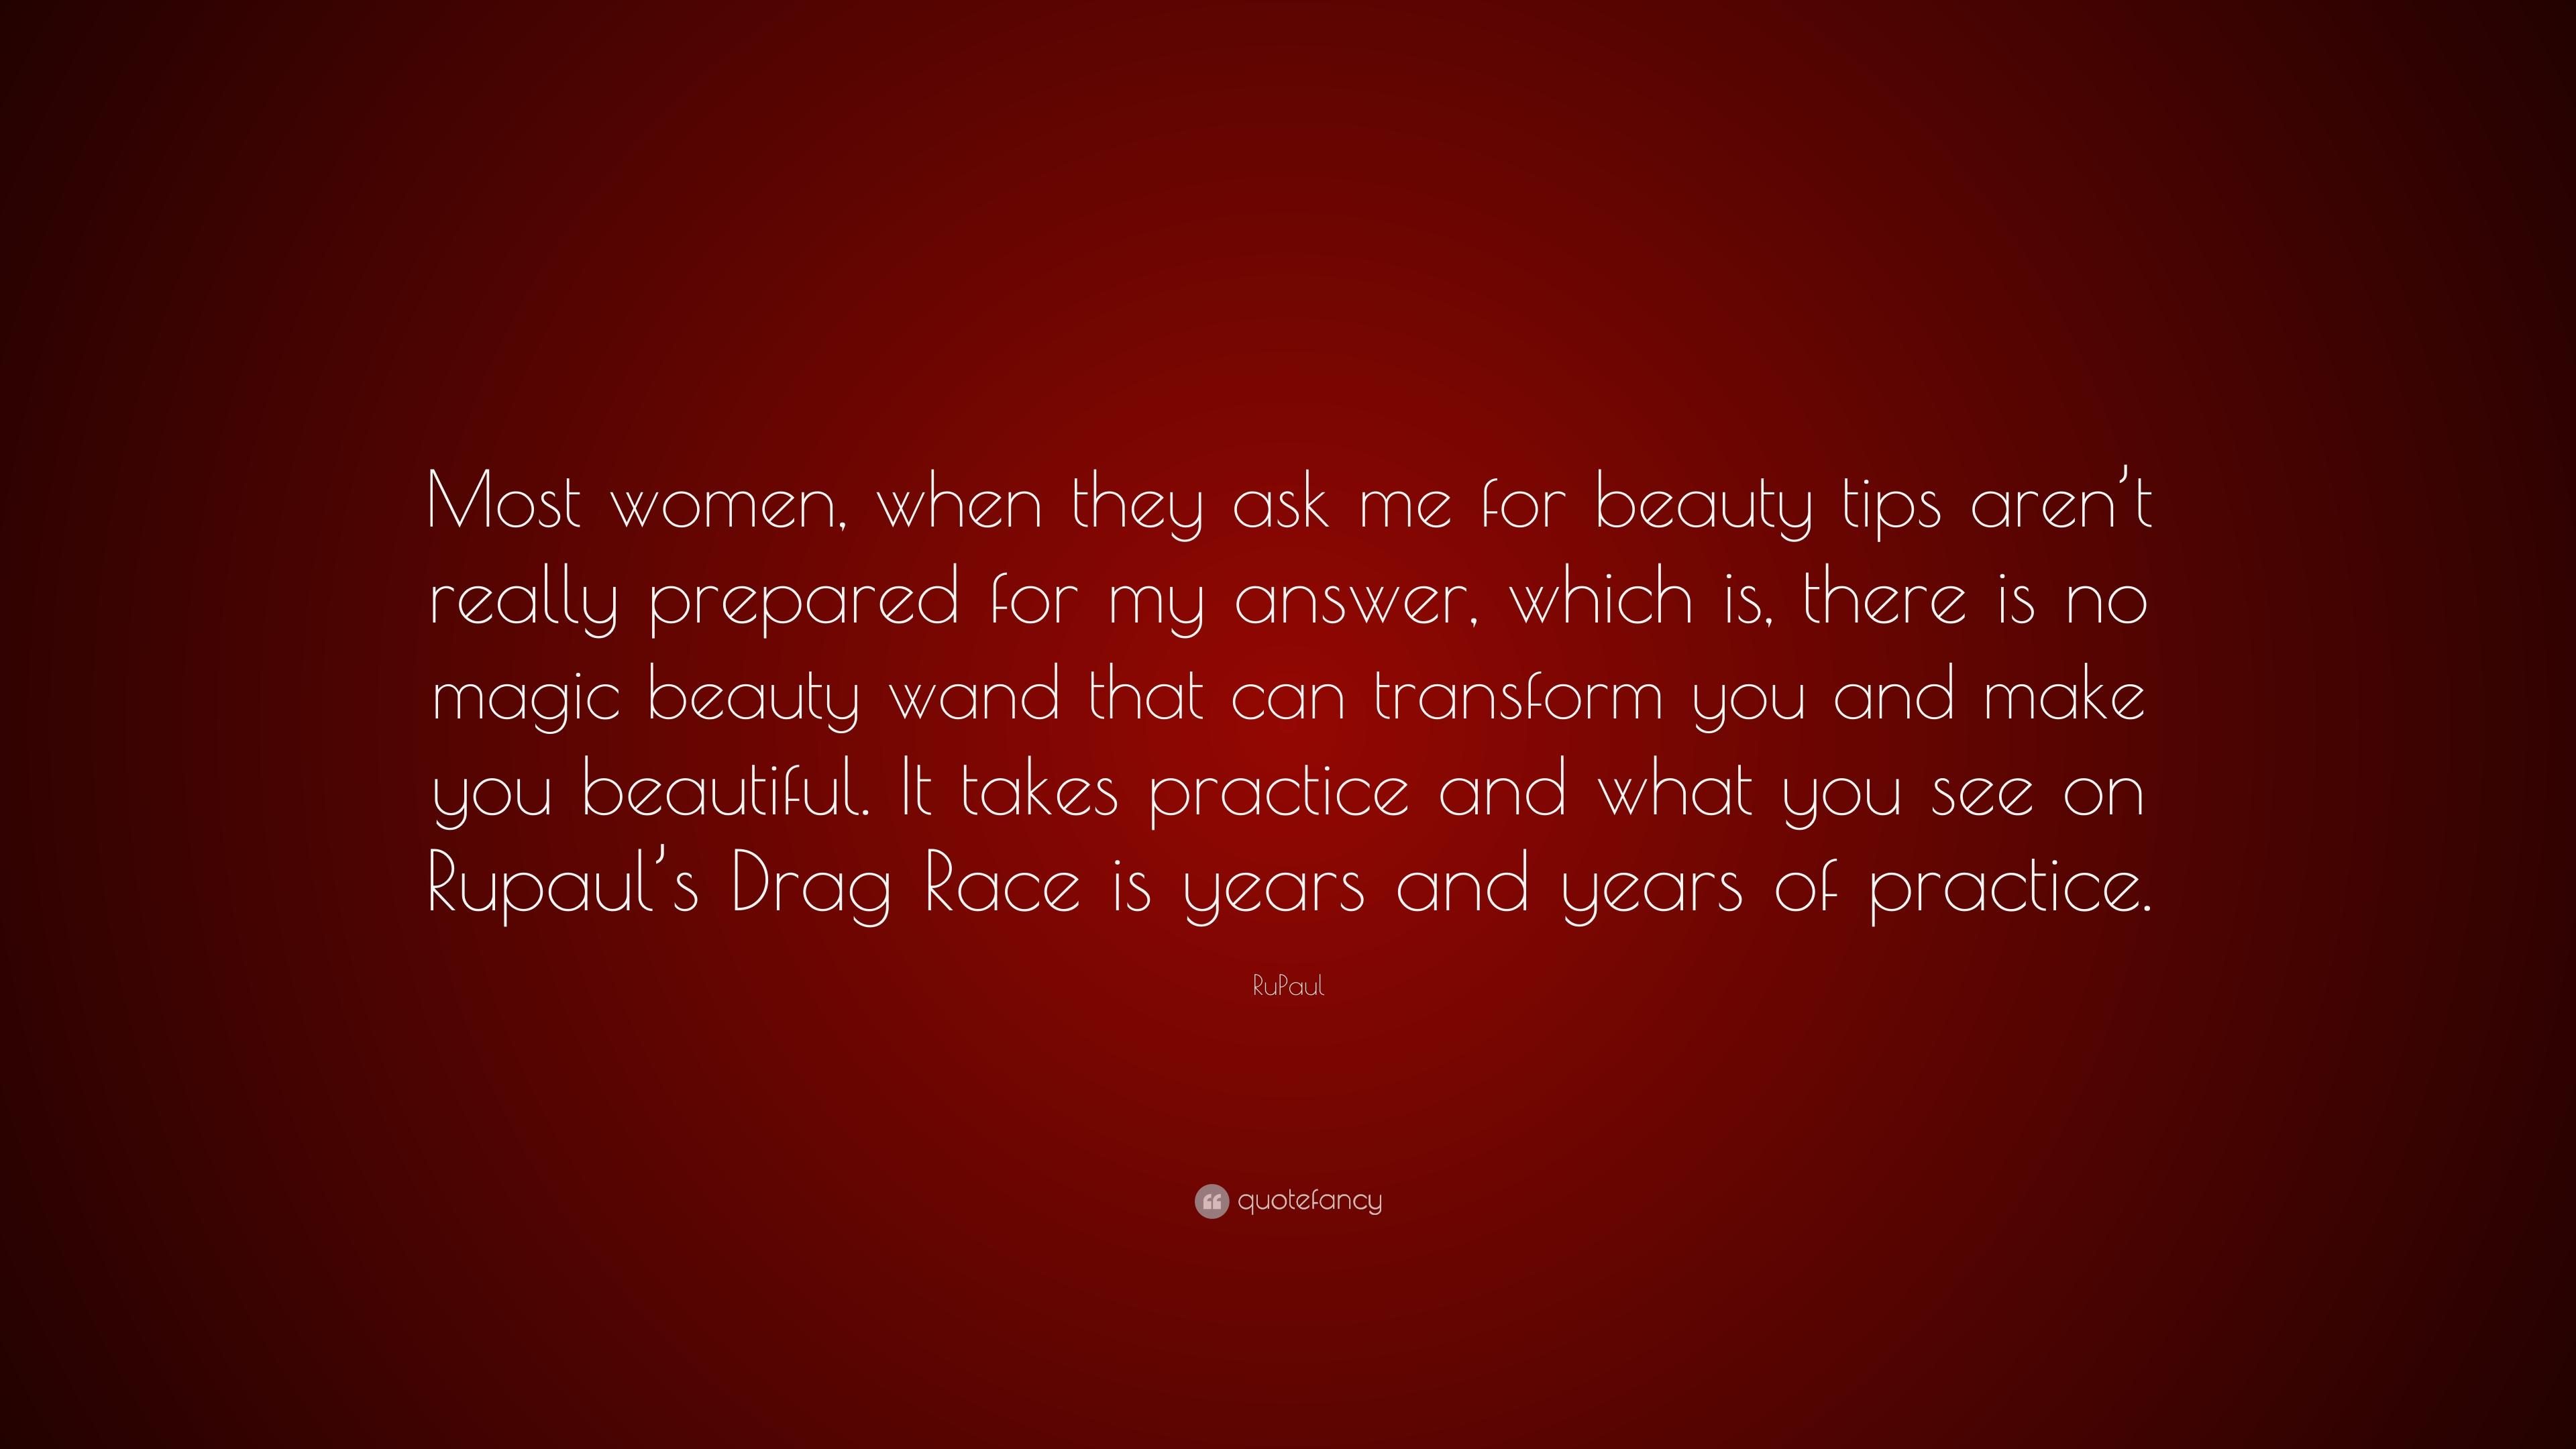 RuPaul Quote: “Most women, when they ask me for beauty tips aren't